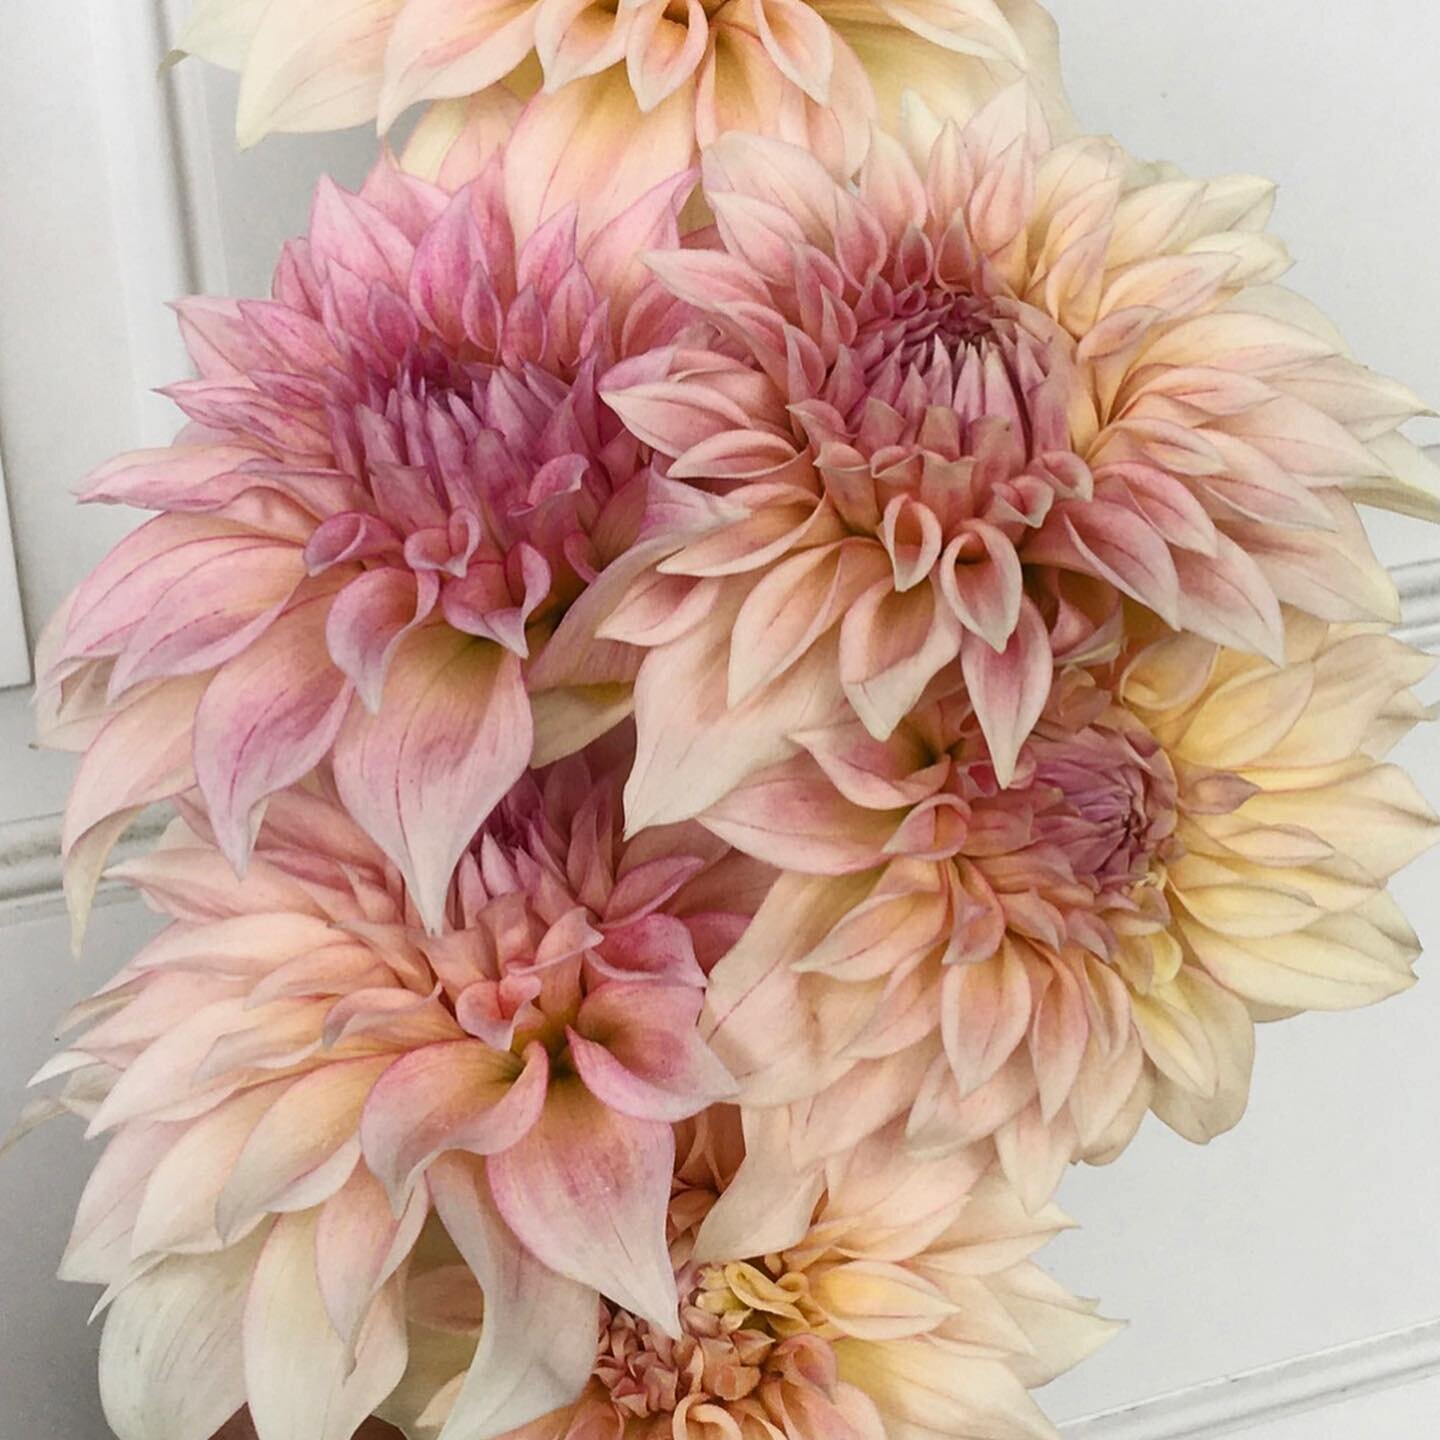 Happy Spring everyone! We are so excited to add a few of the KA varieties to our dahlia field this year.  Pictures are from the breeder Karen Albrecht&rsquo;s site.  If you are interested in Dahlia breeding, her book is a great addition to any garden